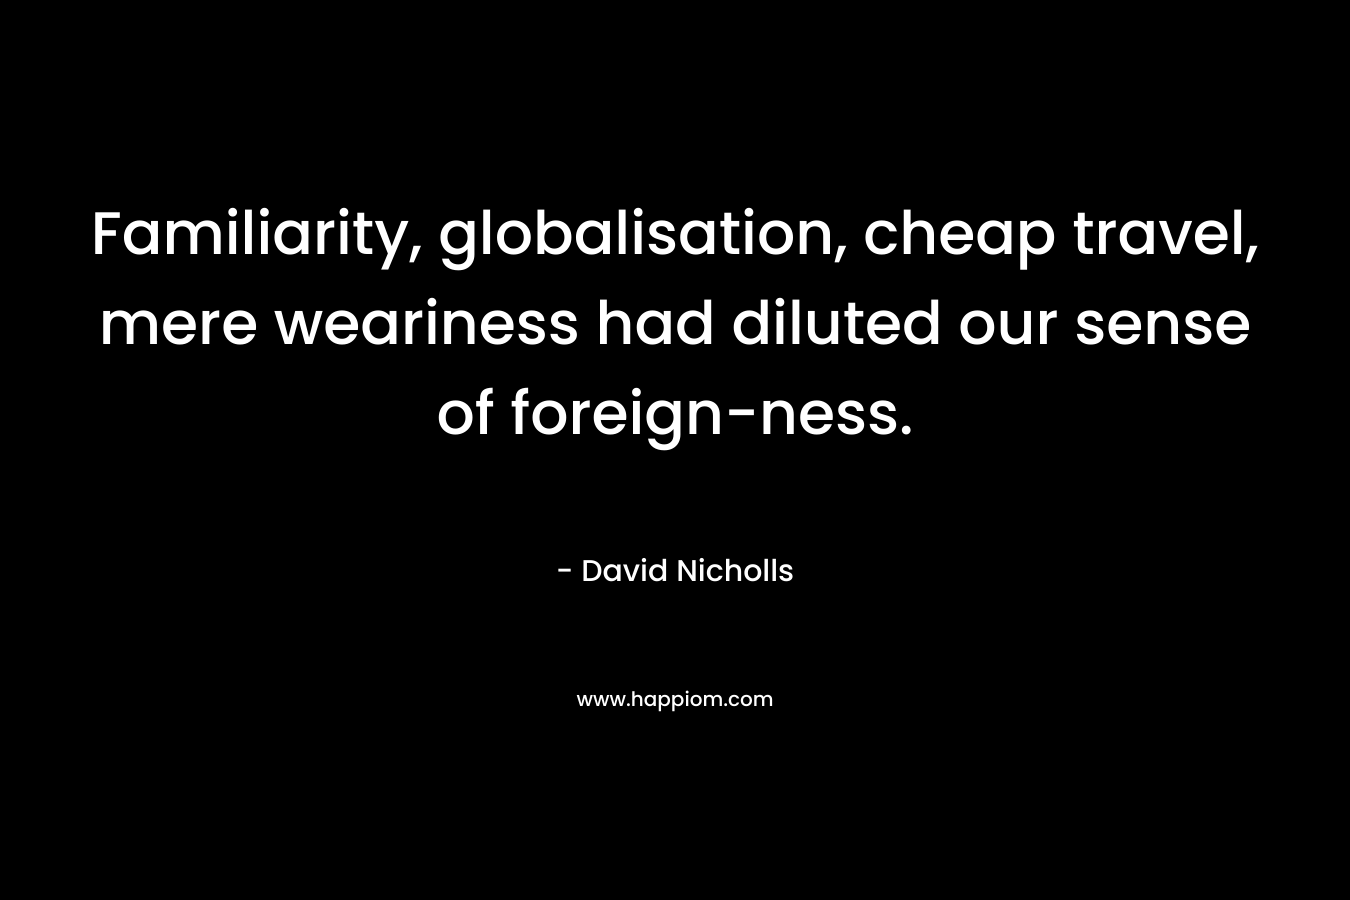 Familiarity, globalisation, cheap travel, mere weariness had diluted our sense of foreign-ness.